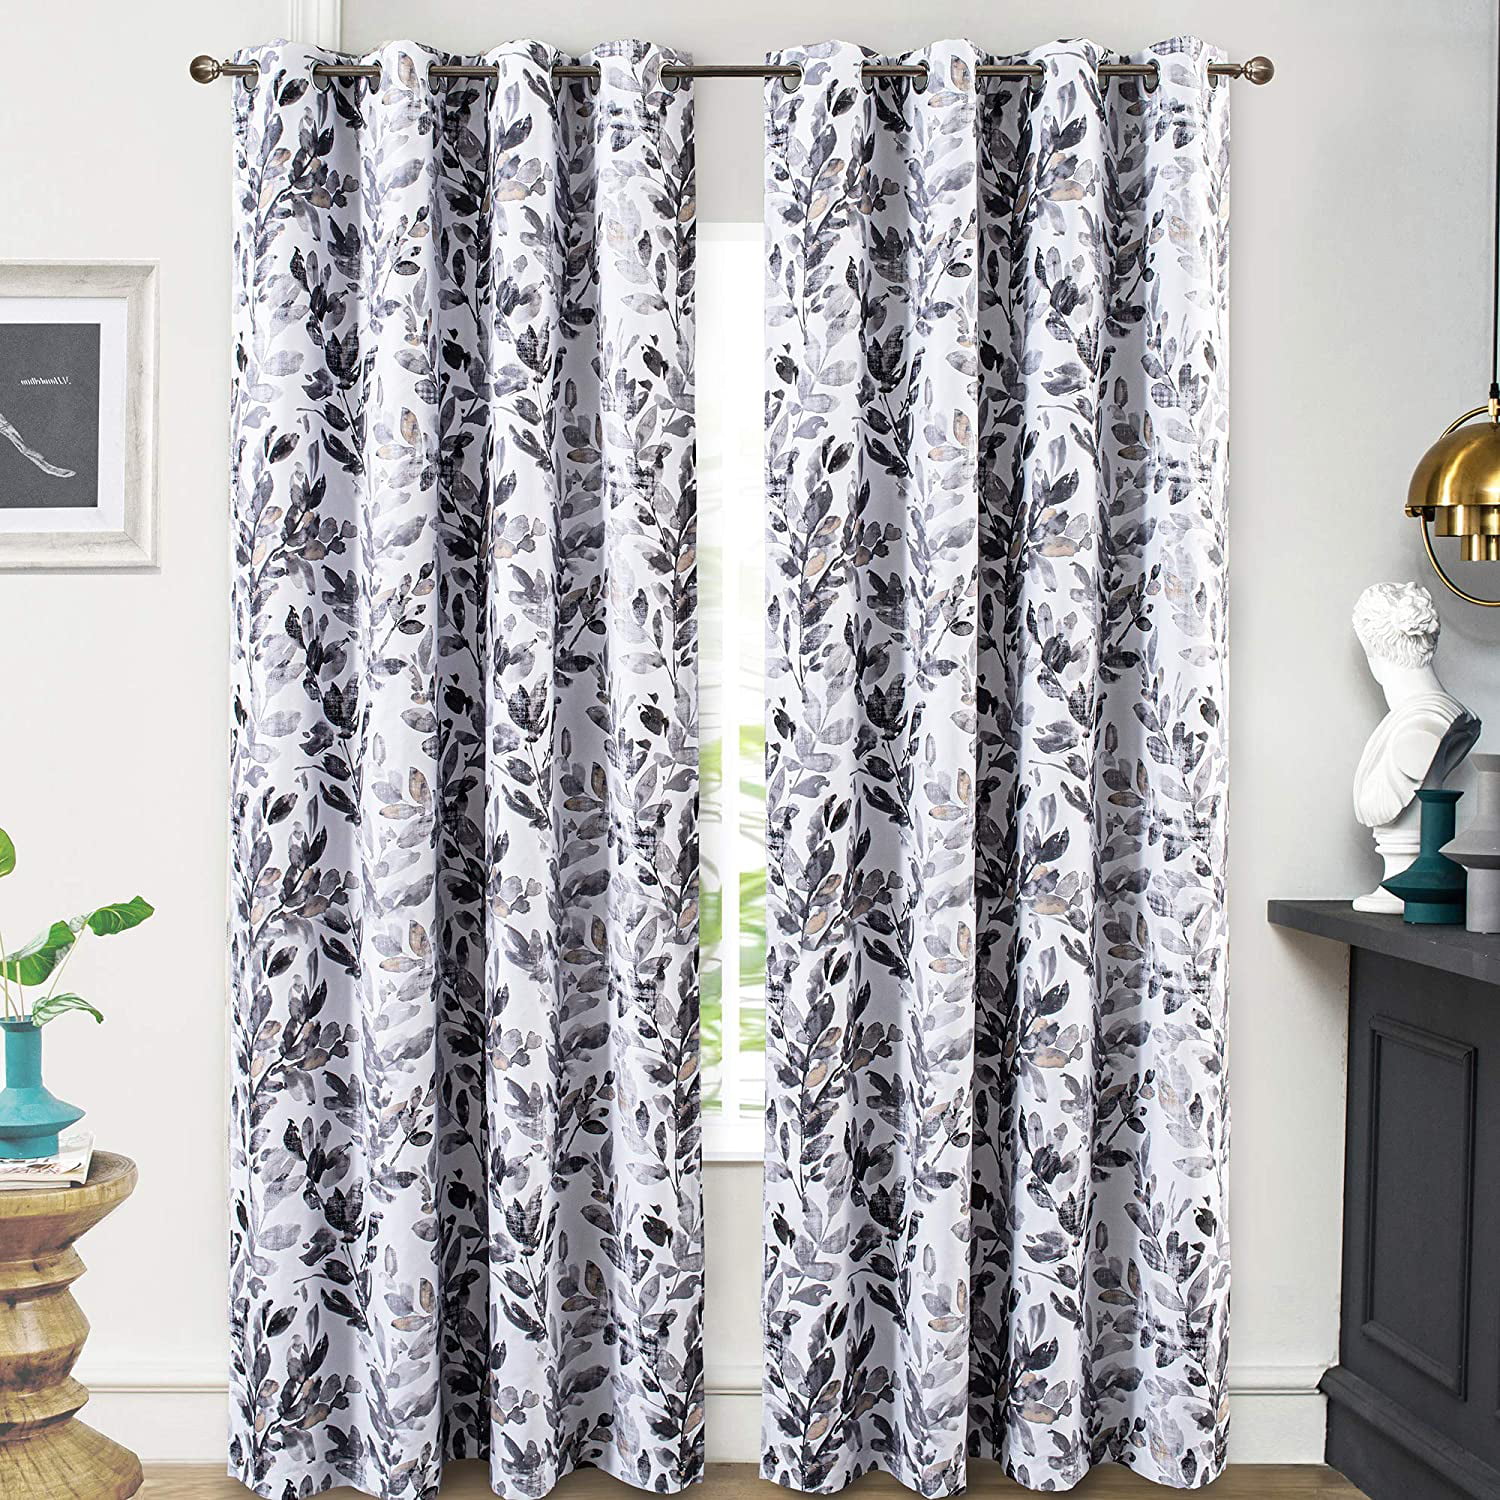 1Valance 18"L Blackout Solid Curtain Rod Pocket Small Window. Home 2Tier 36"L 